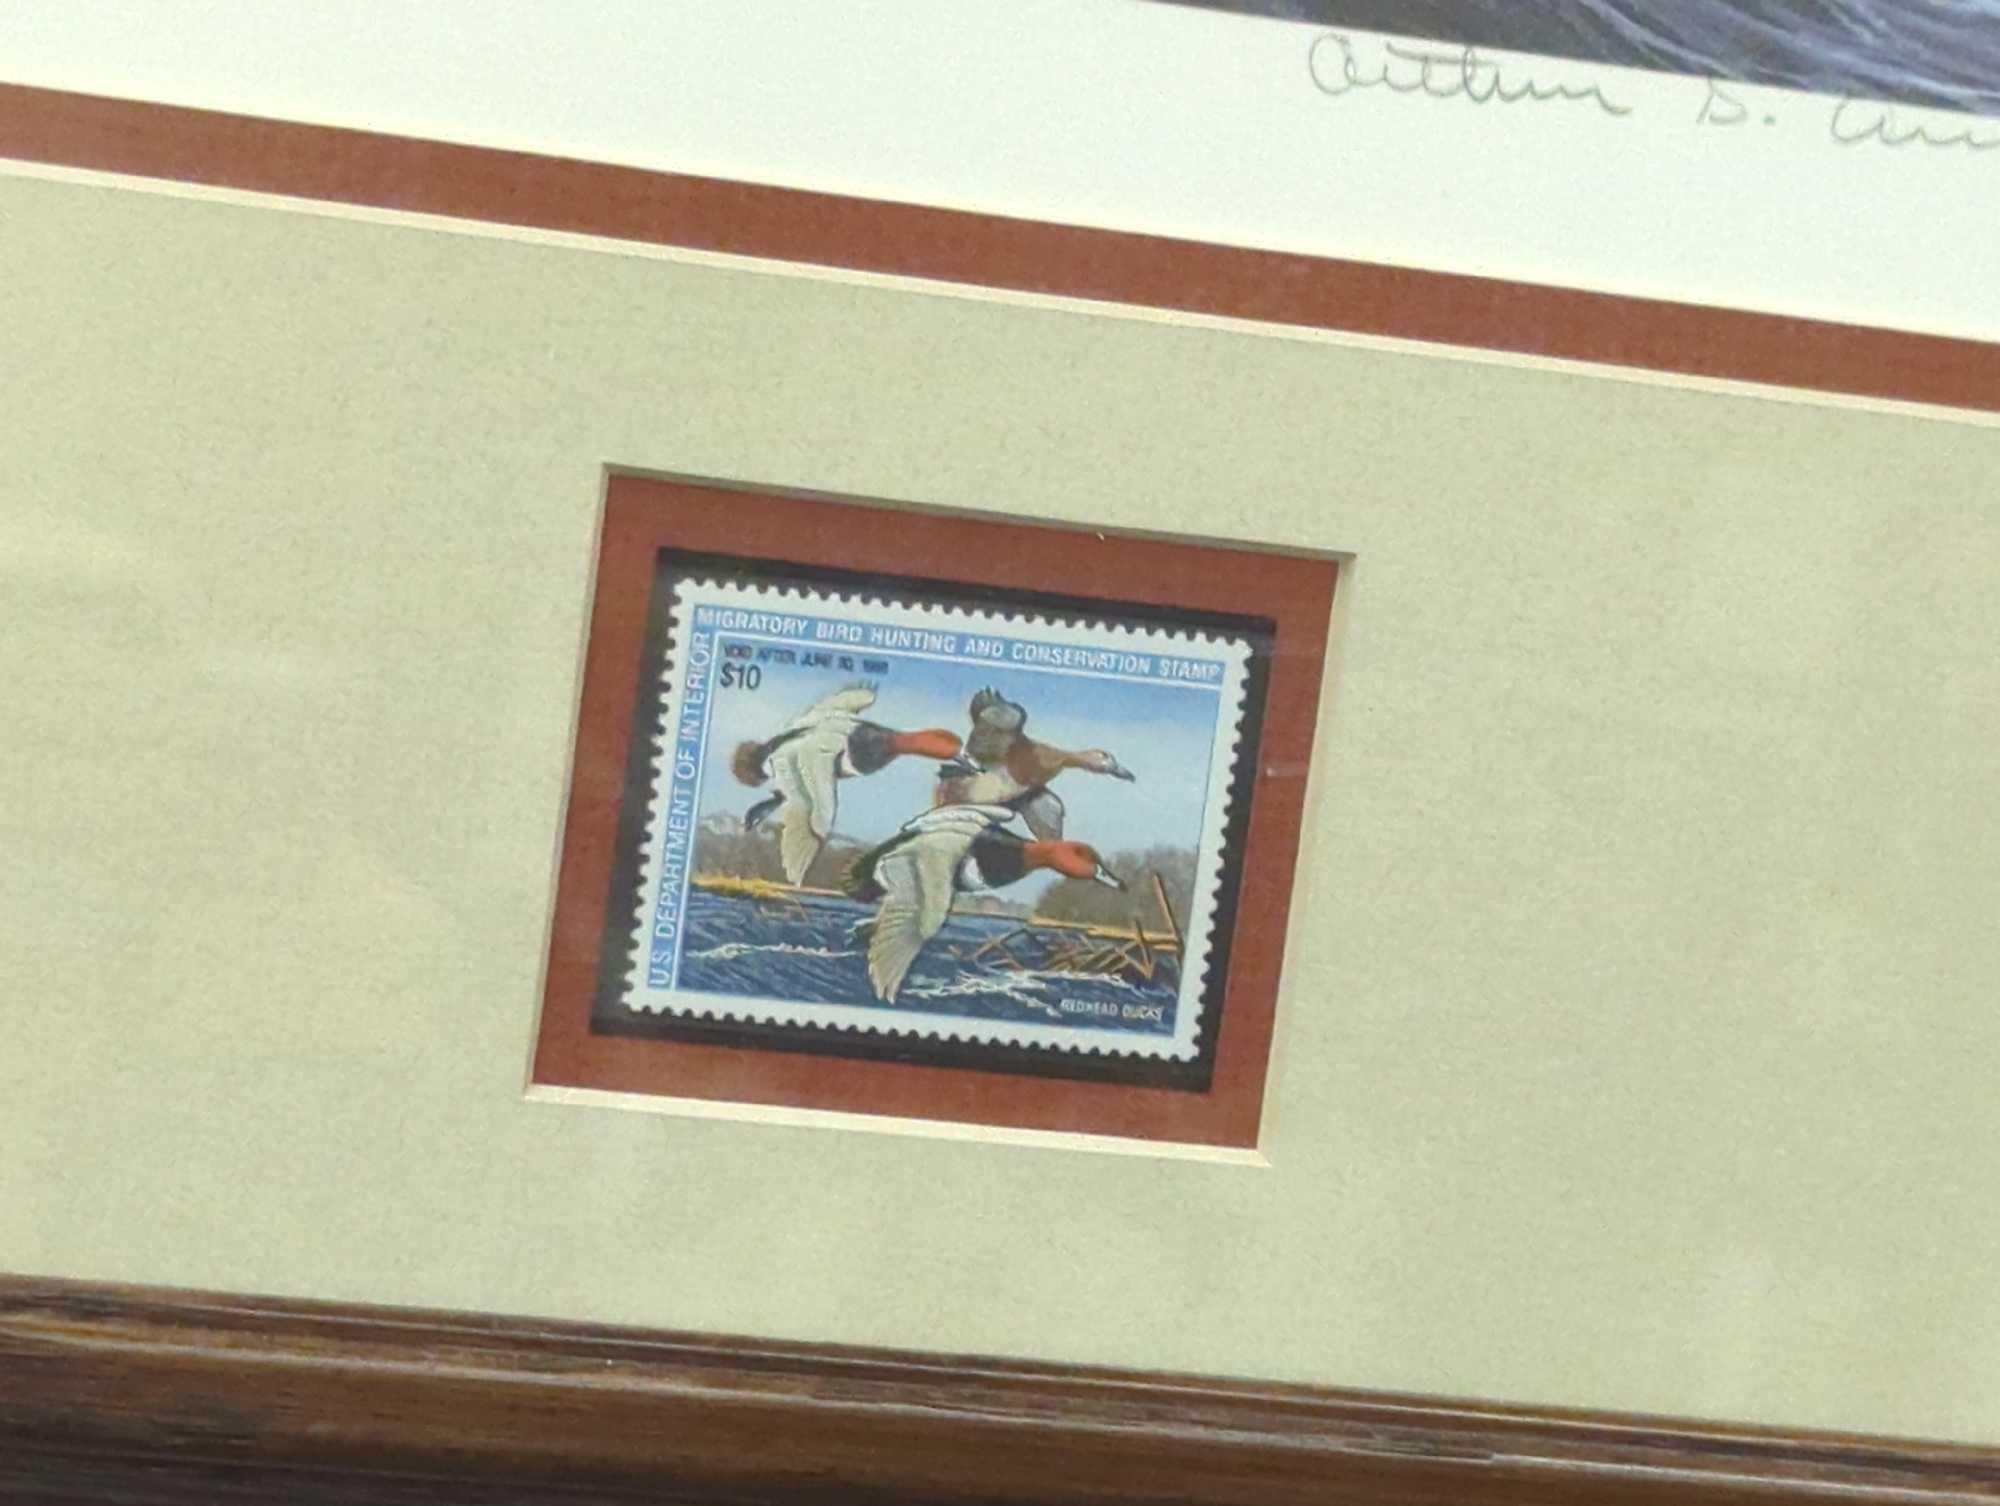 Framed Print of "1987 Federal Duck Stamp Conservation Edition" by Arthur G. Anderson, Included in